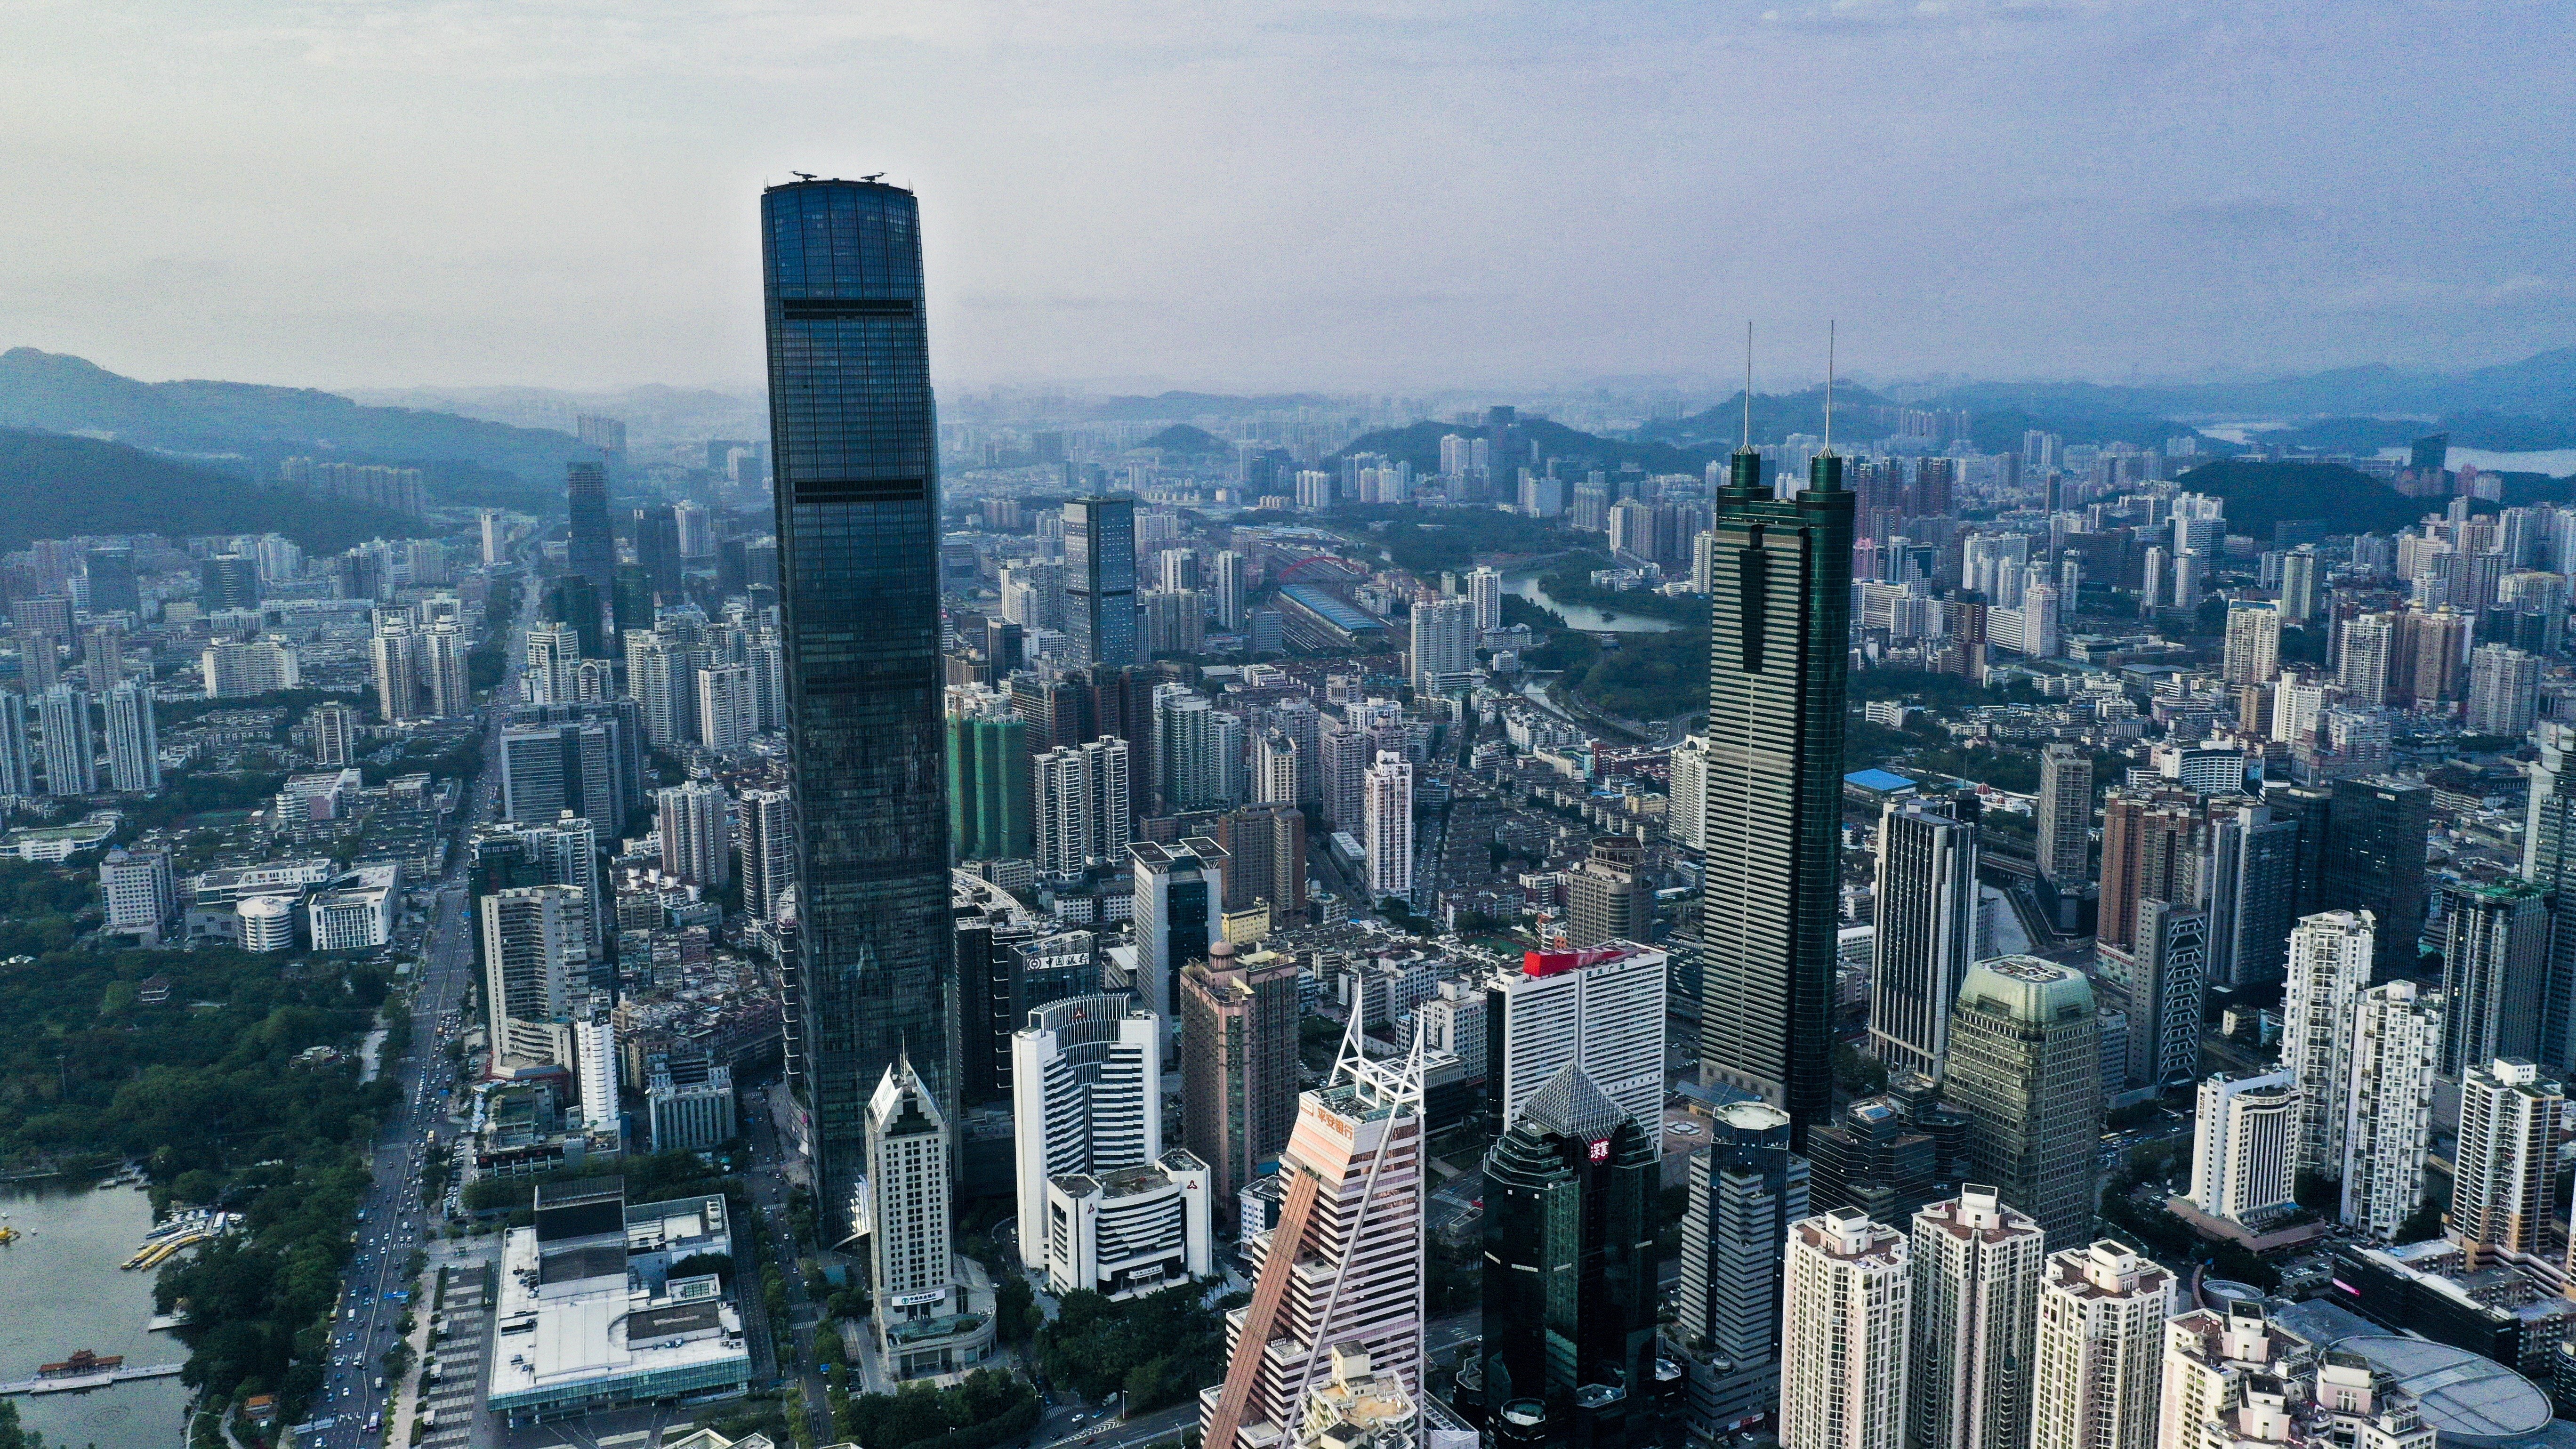 A view of Shenzhen, one of the 11 southern cities, including Hong Kong and Macau, making up the Greater Bay Area megalopolis, a hi-tech innovation and economic hub that aims to rival California’s Silicon Valley by 2035. Photo: Martin Chan